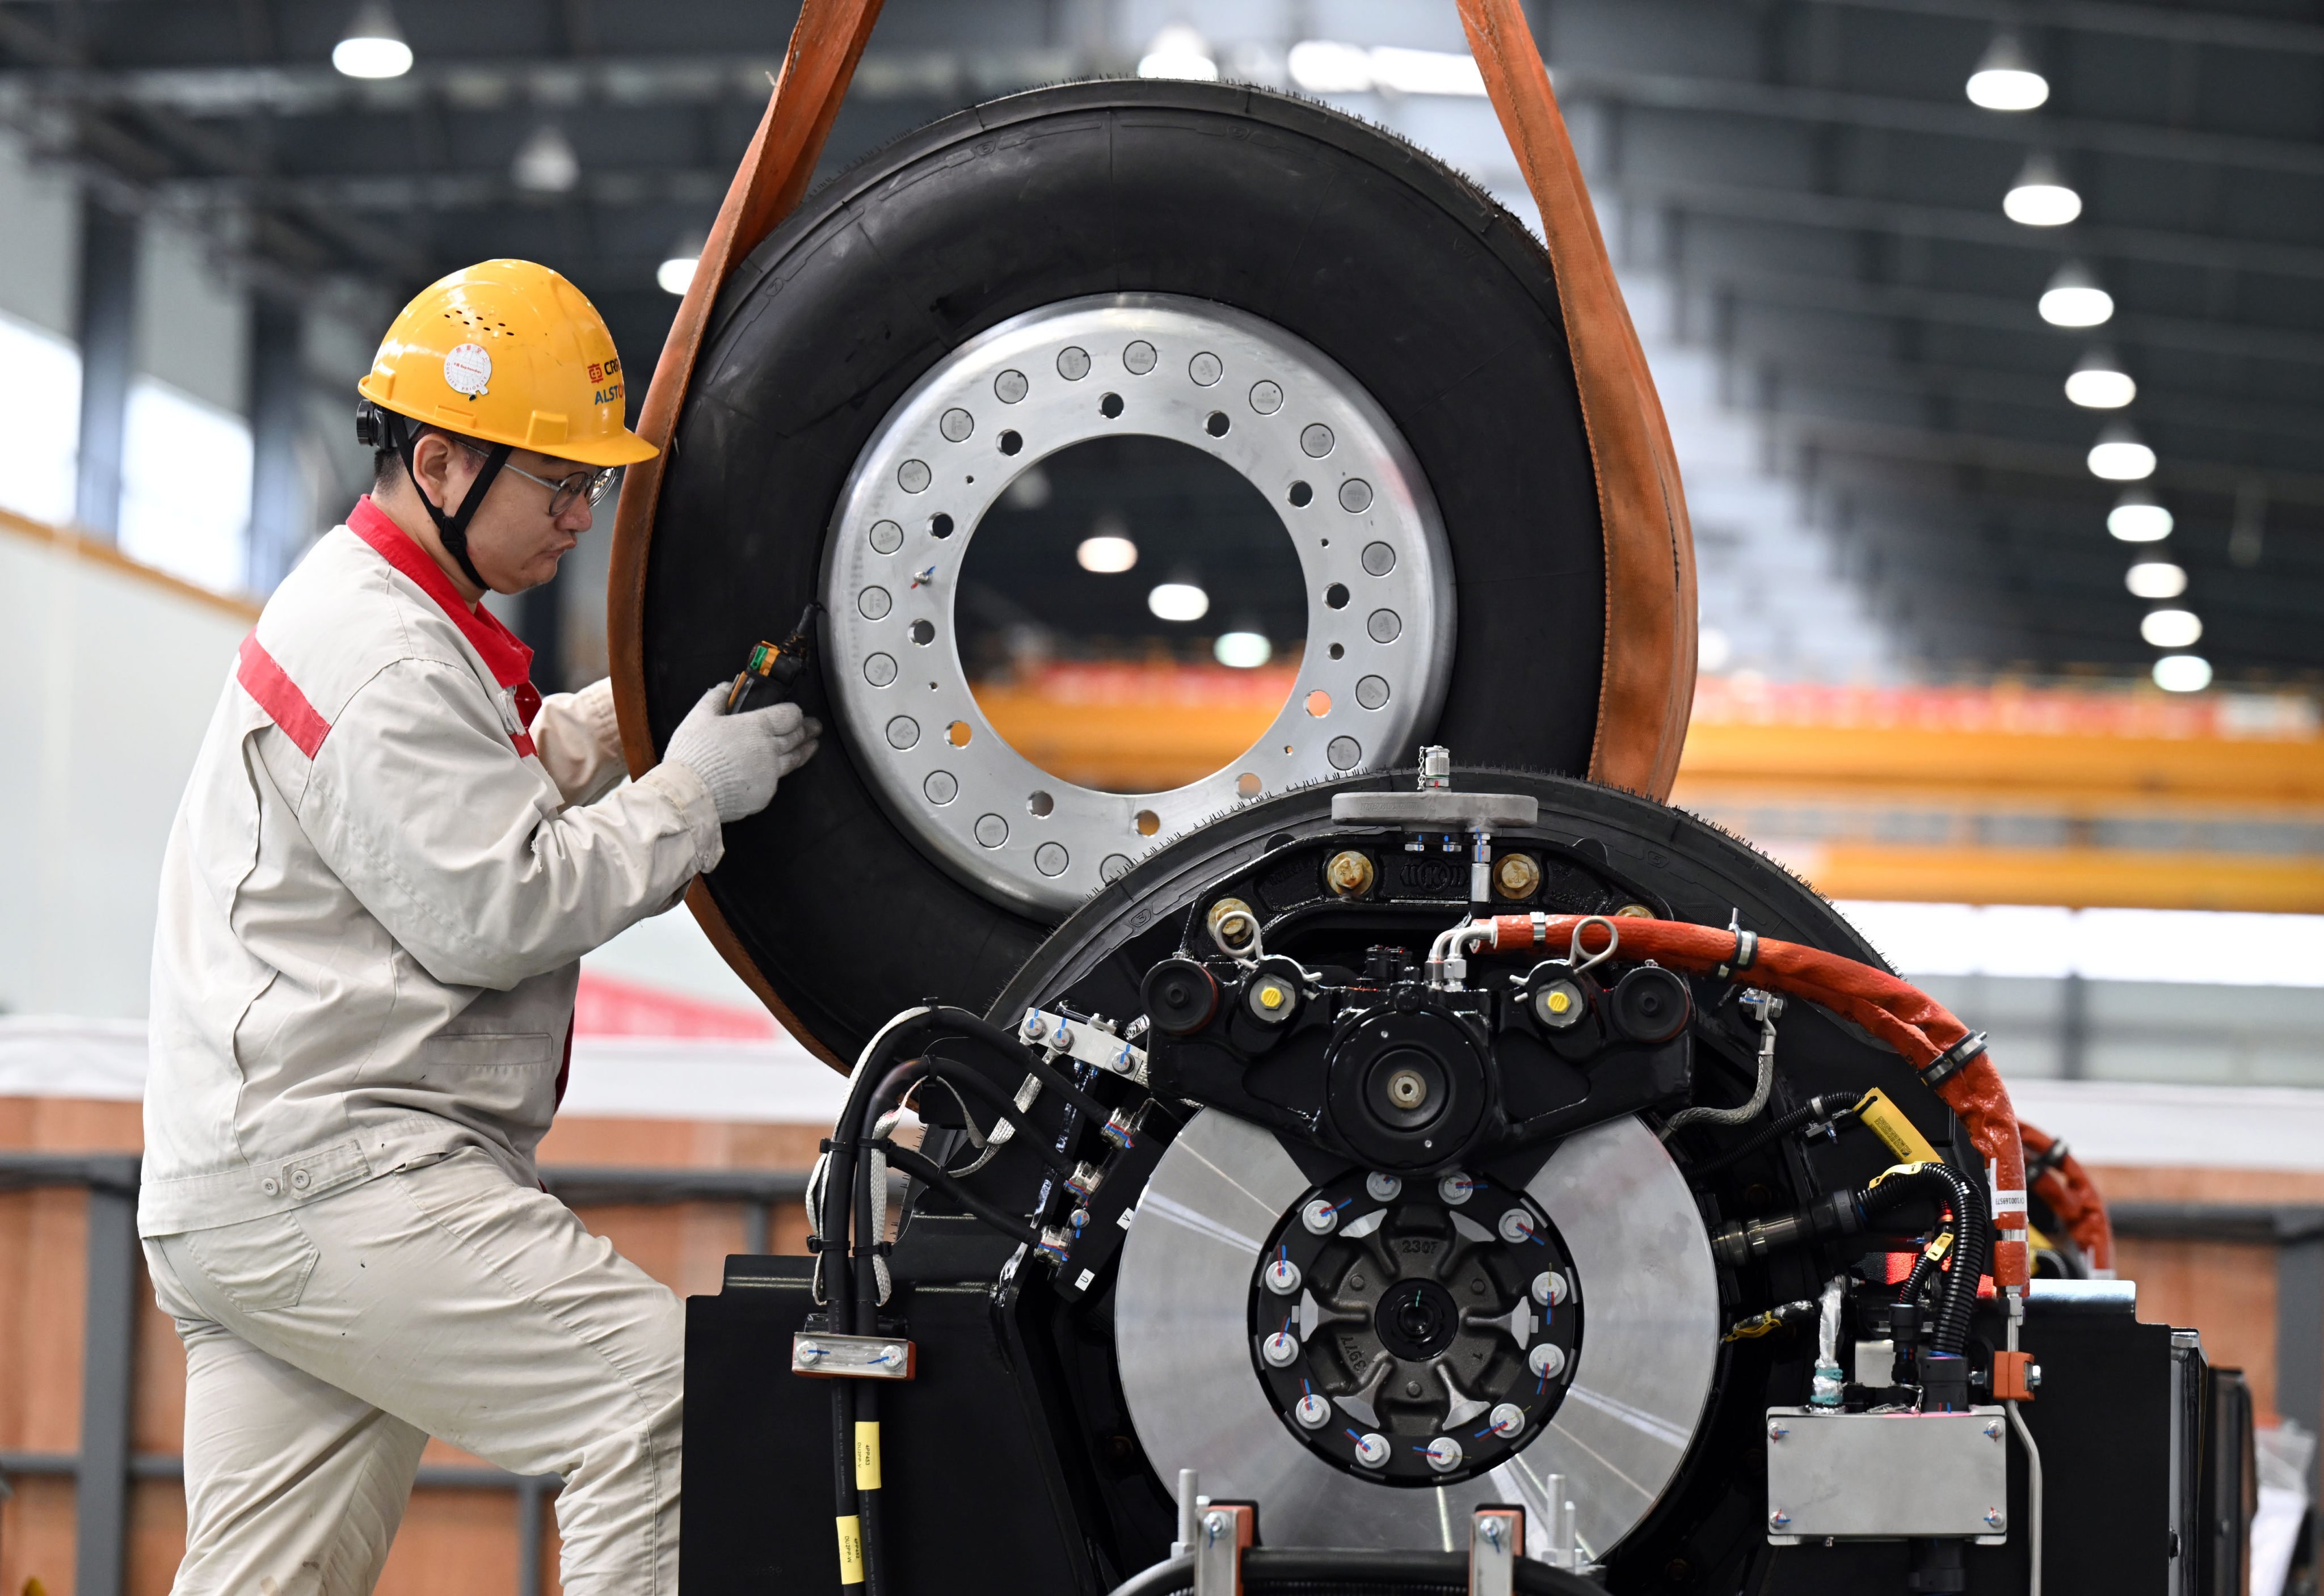 CRRC Qingdao Sifang Locomotive Co had hoped to provide 20 electric push-pull trains and their maintenance. Photo: Xinhua